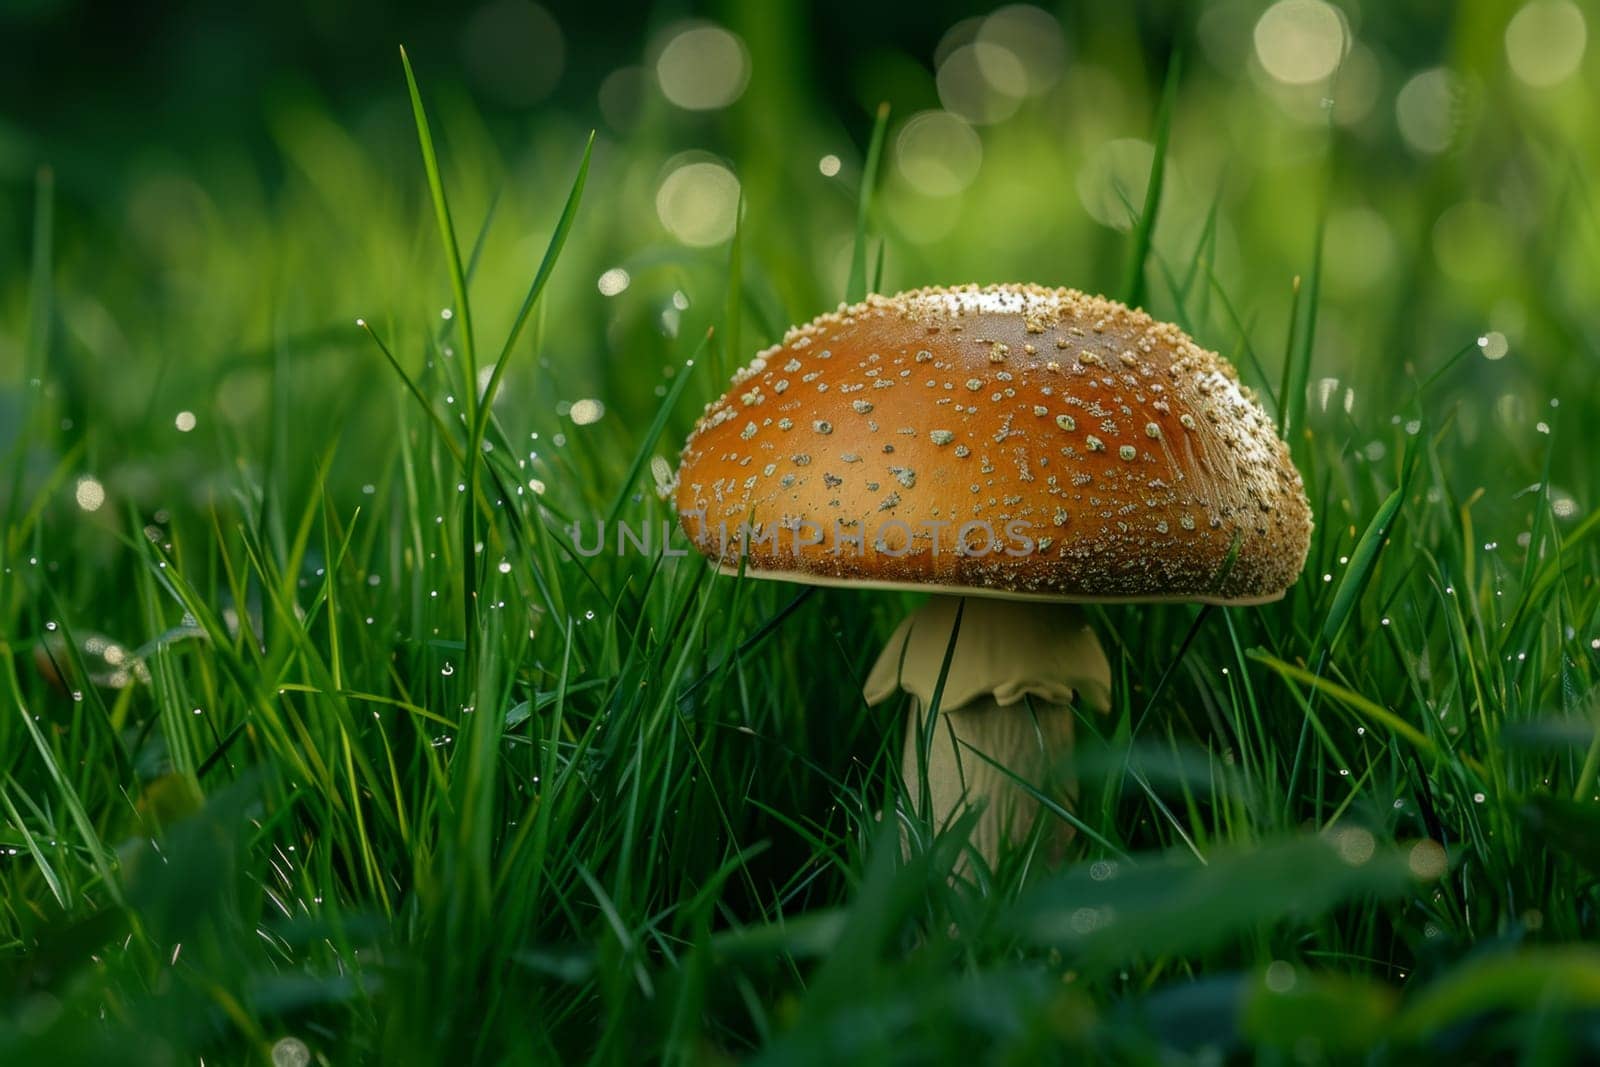 Mushroom fly agaric growing in the forest. Mushroom picking concept by Lobachad